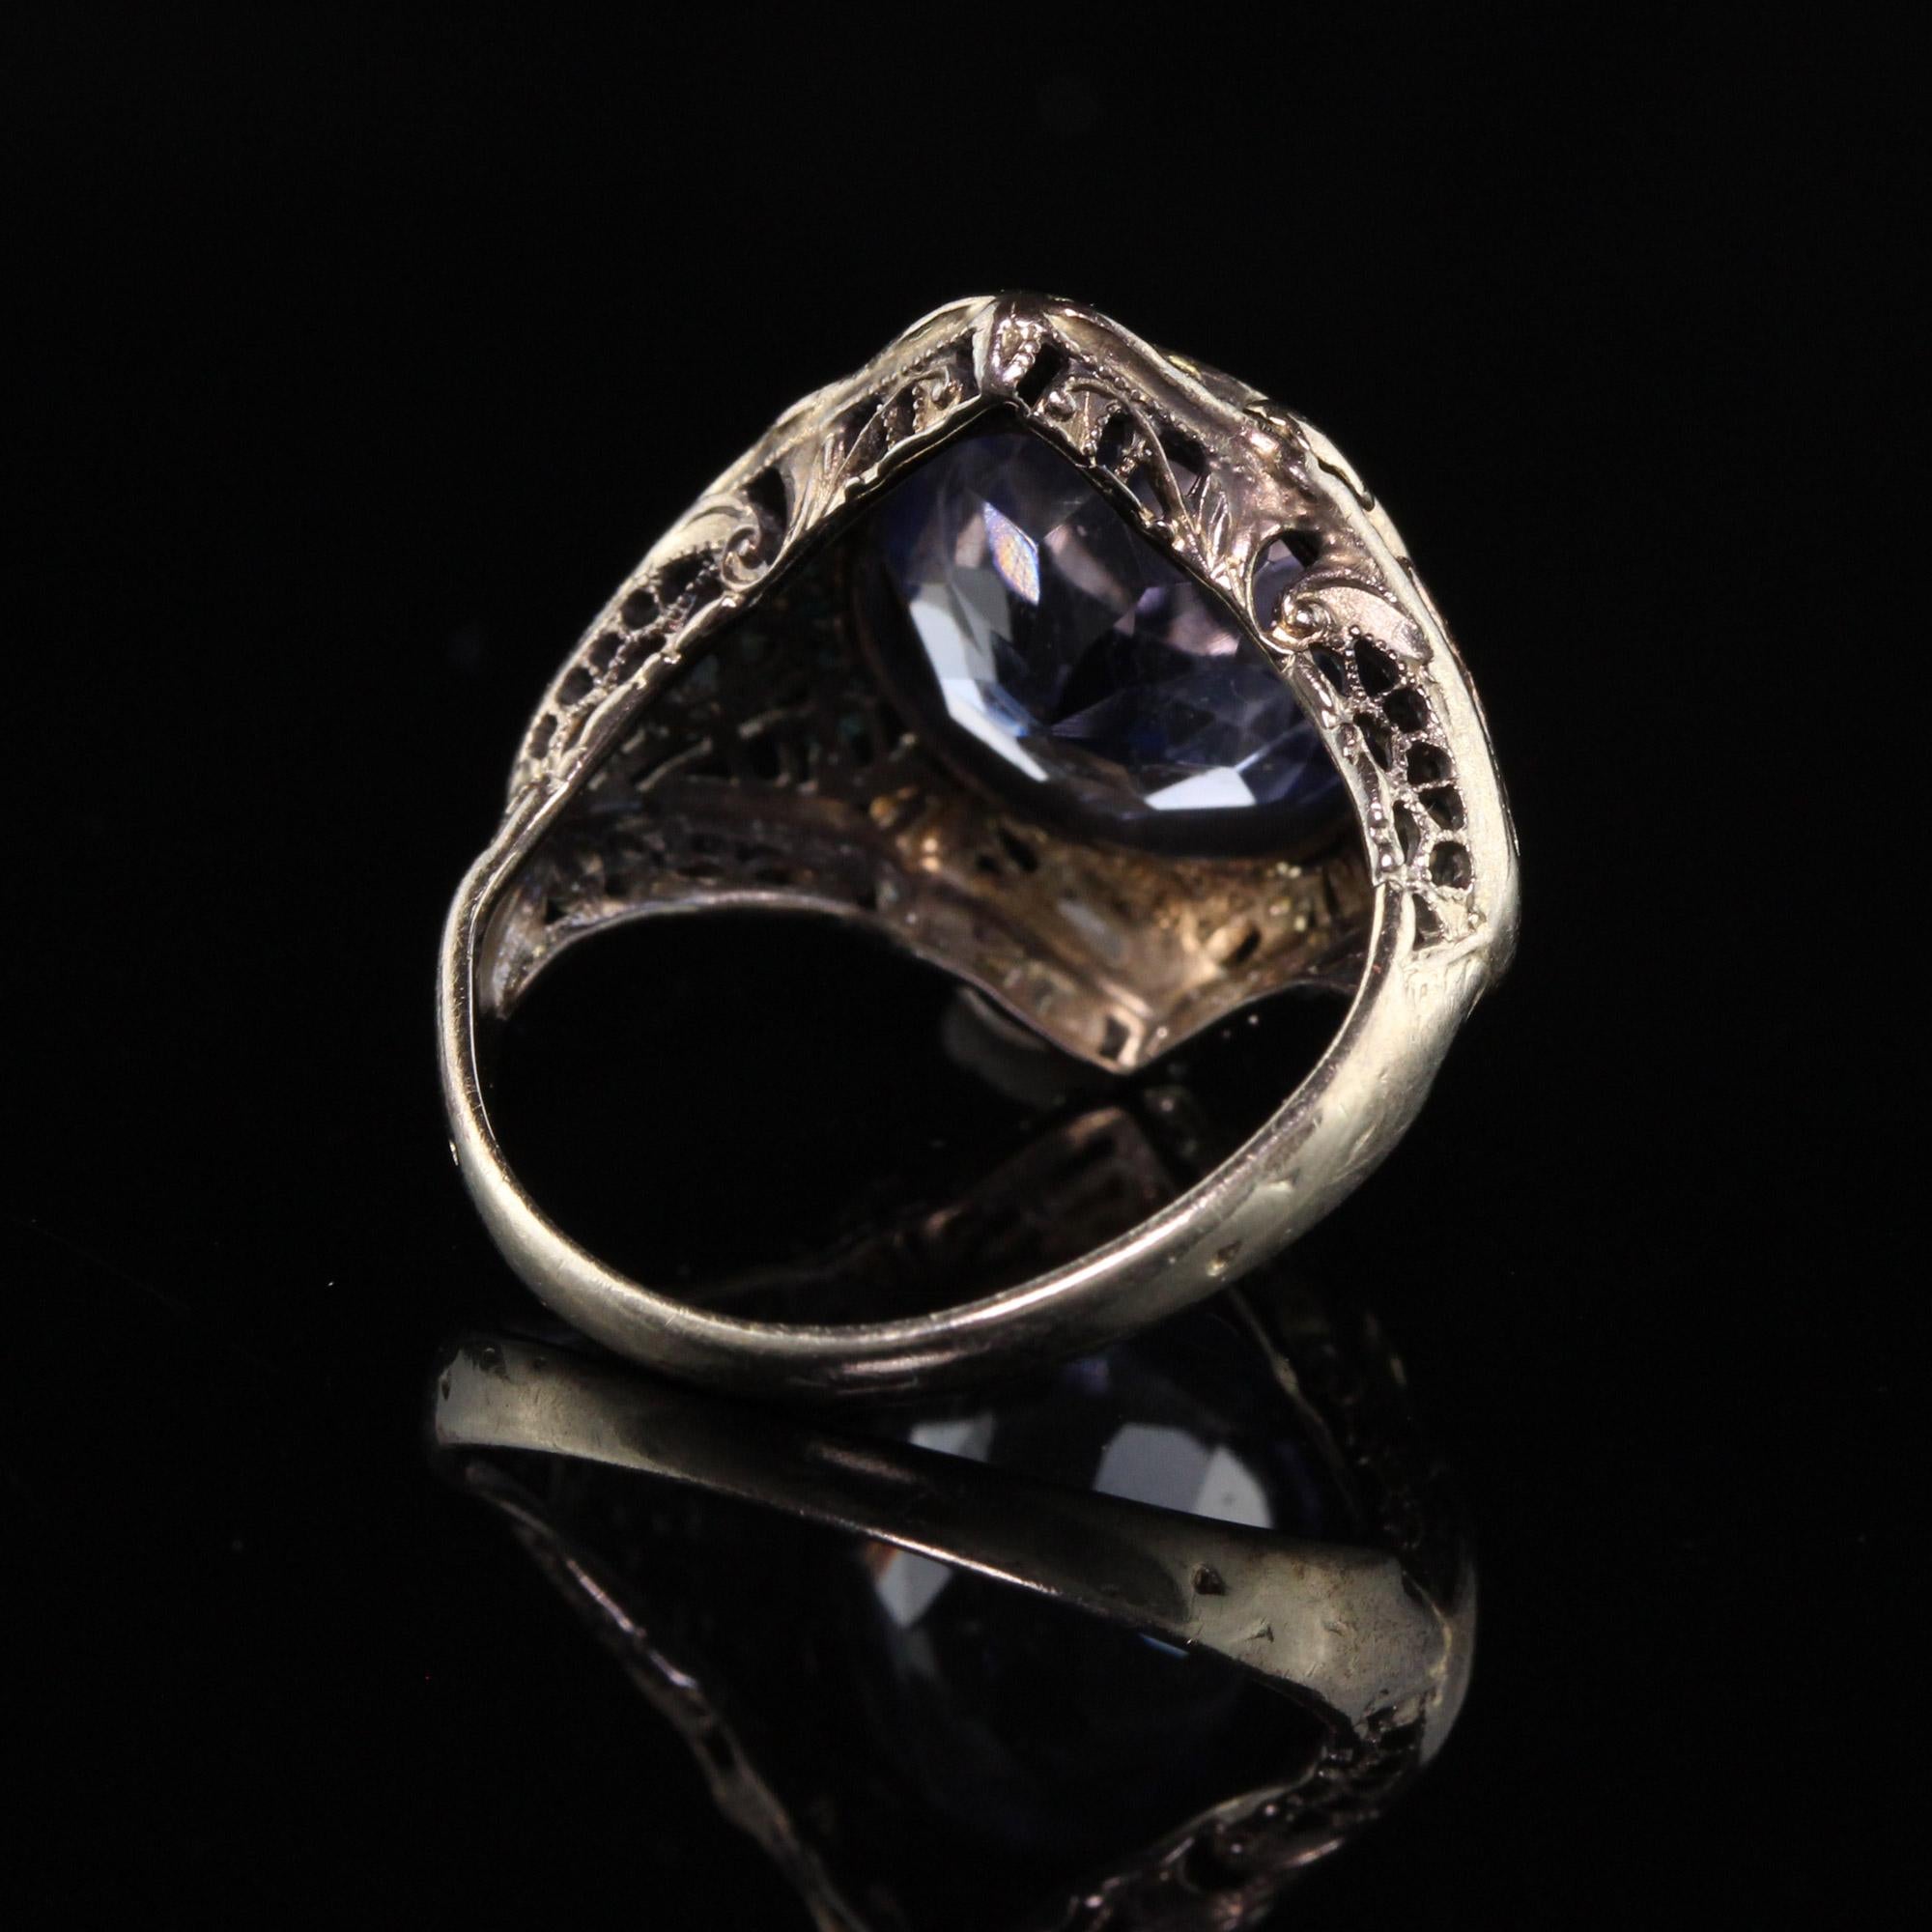 Antique Art Deco 14K White Gold Tri Gold Filigree Ring In Good Condition For Sale In Great Neck, NY